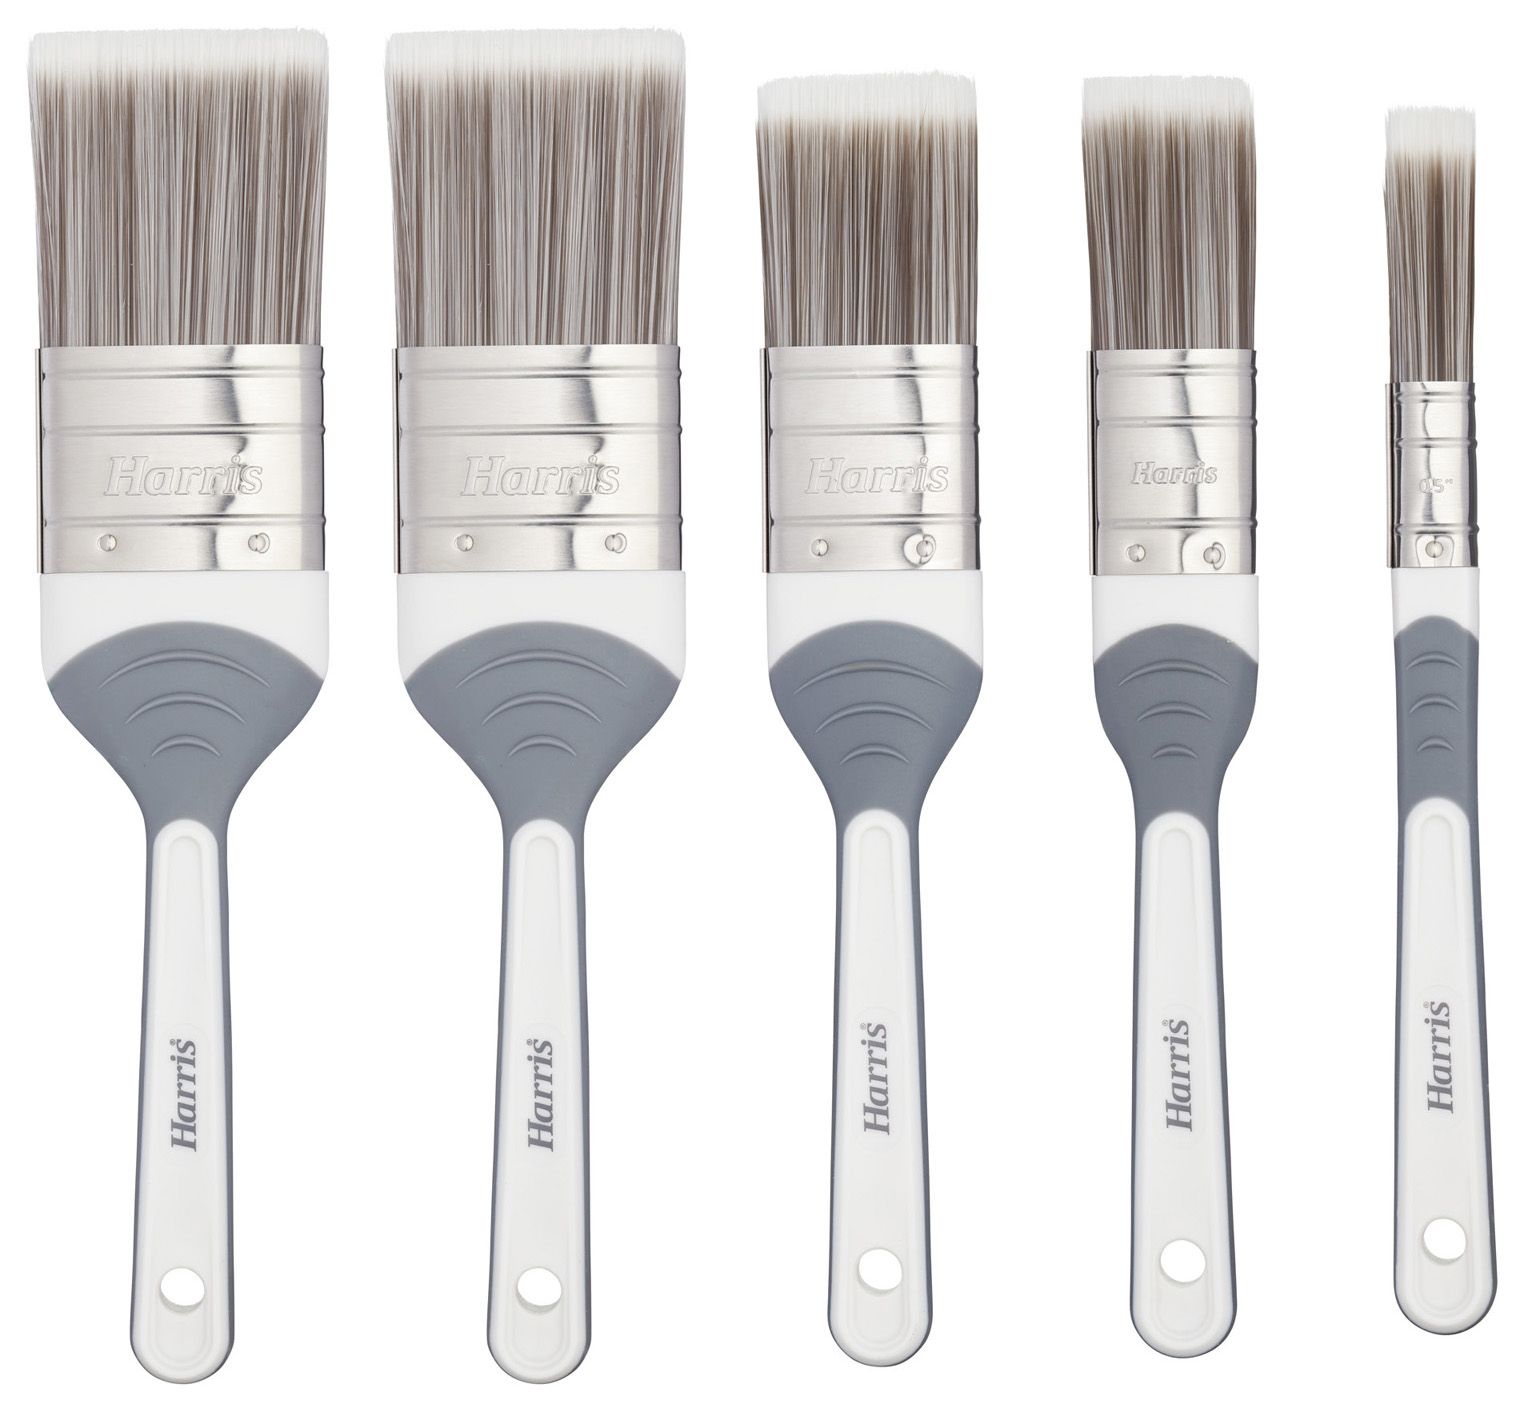 Harris Seriously Good Walls & Ceilings Paint Brush Set - Pack of 5